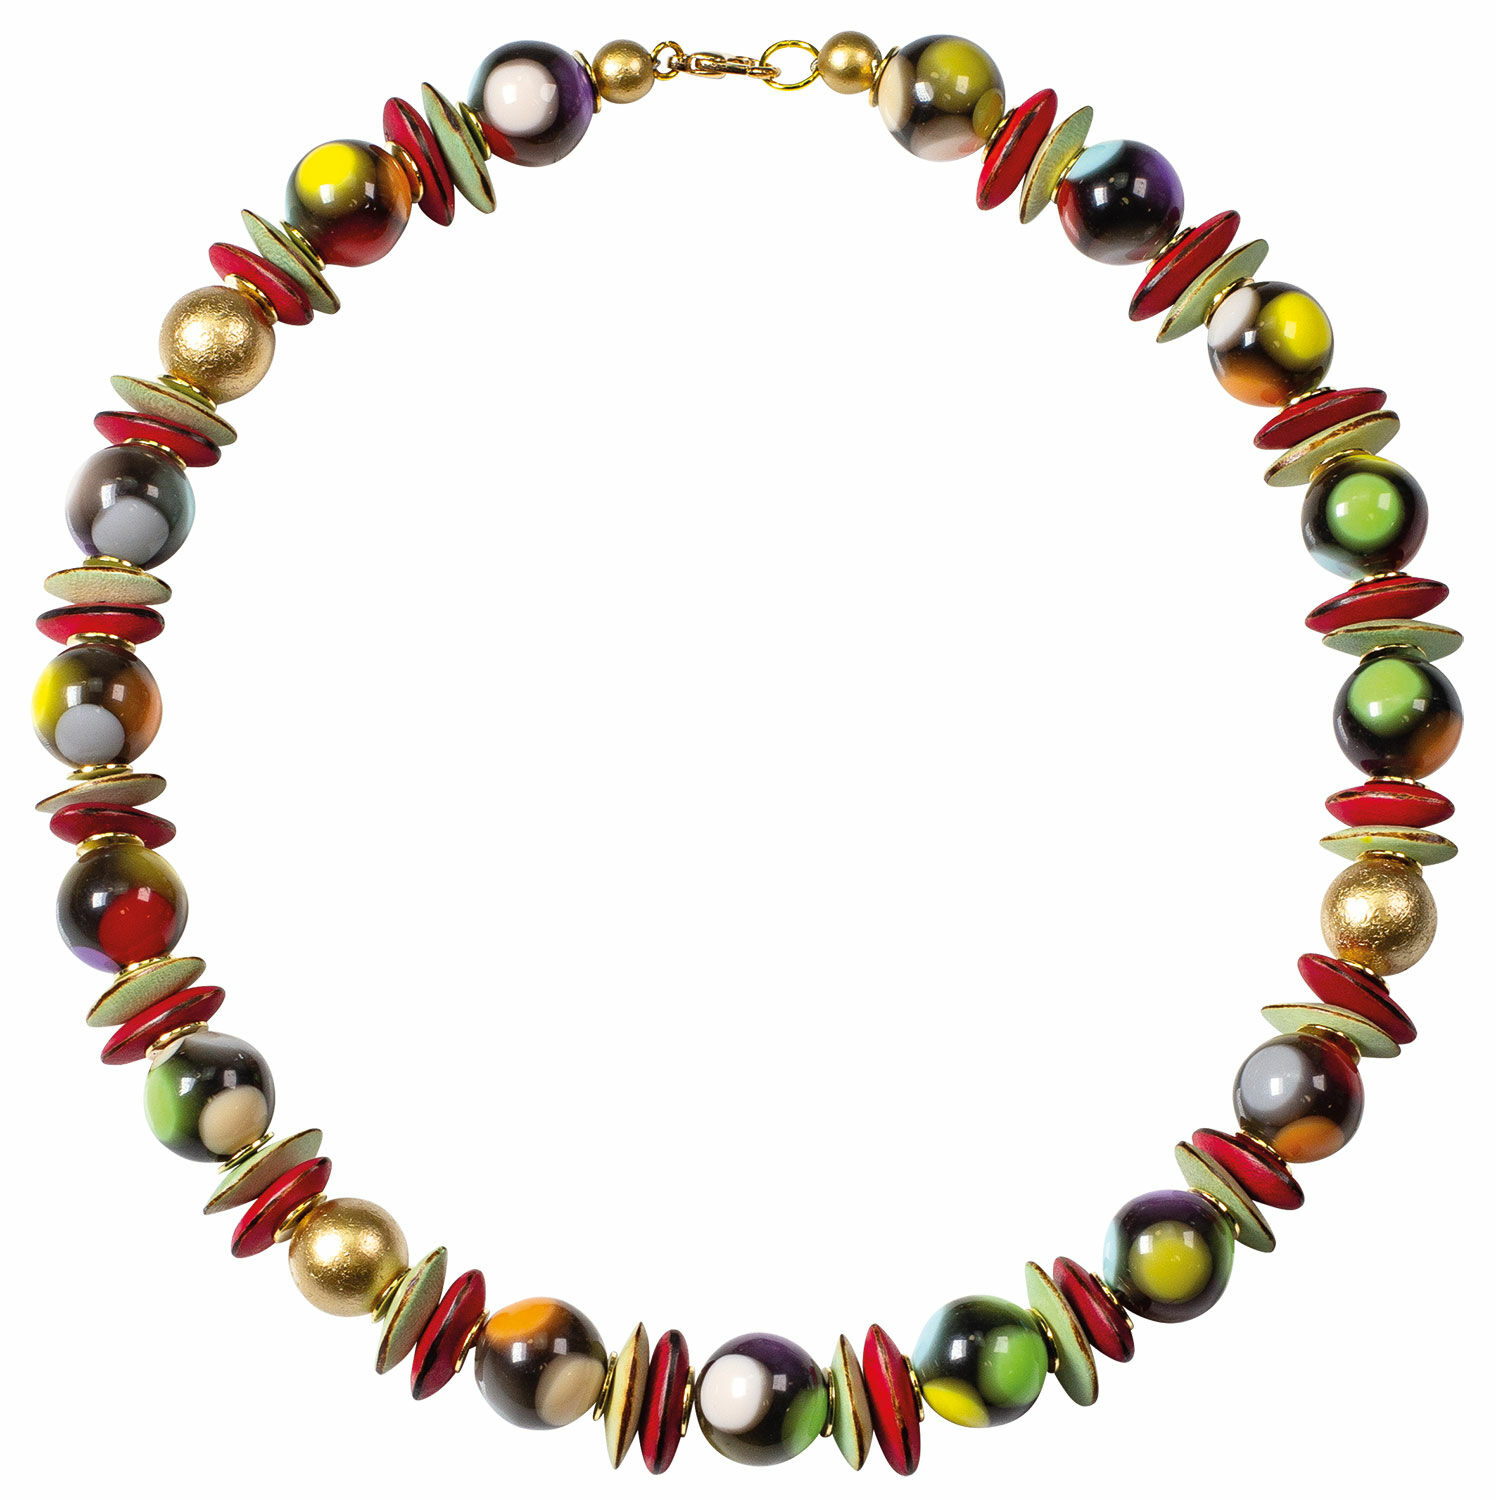 Necklace "Play of Colours" by Anna Mütz